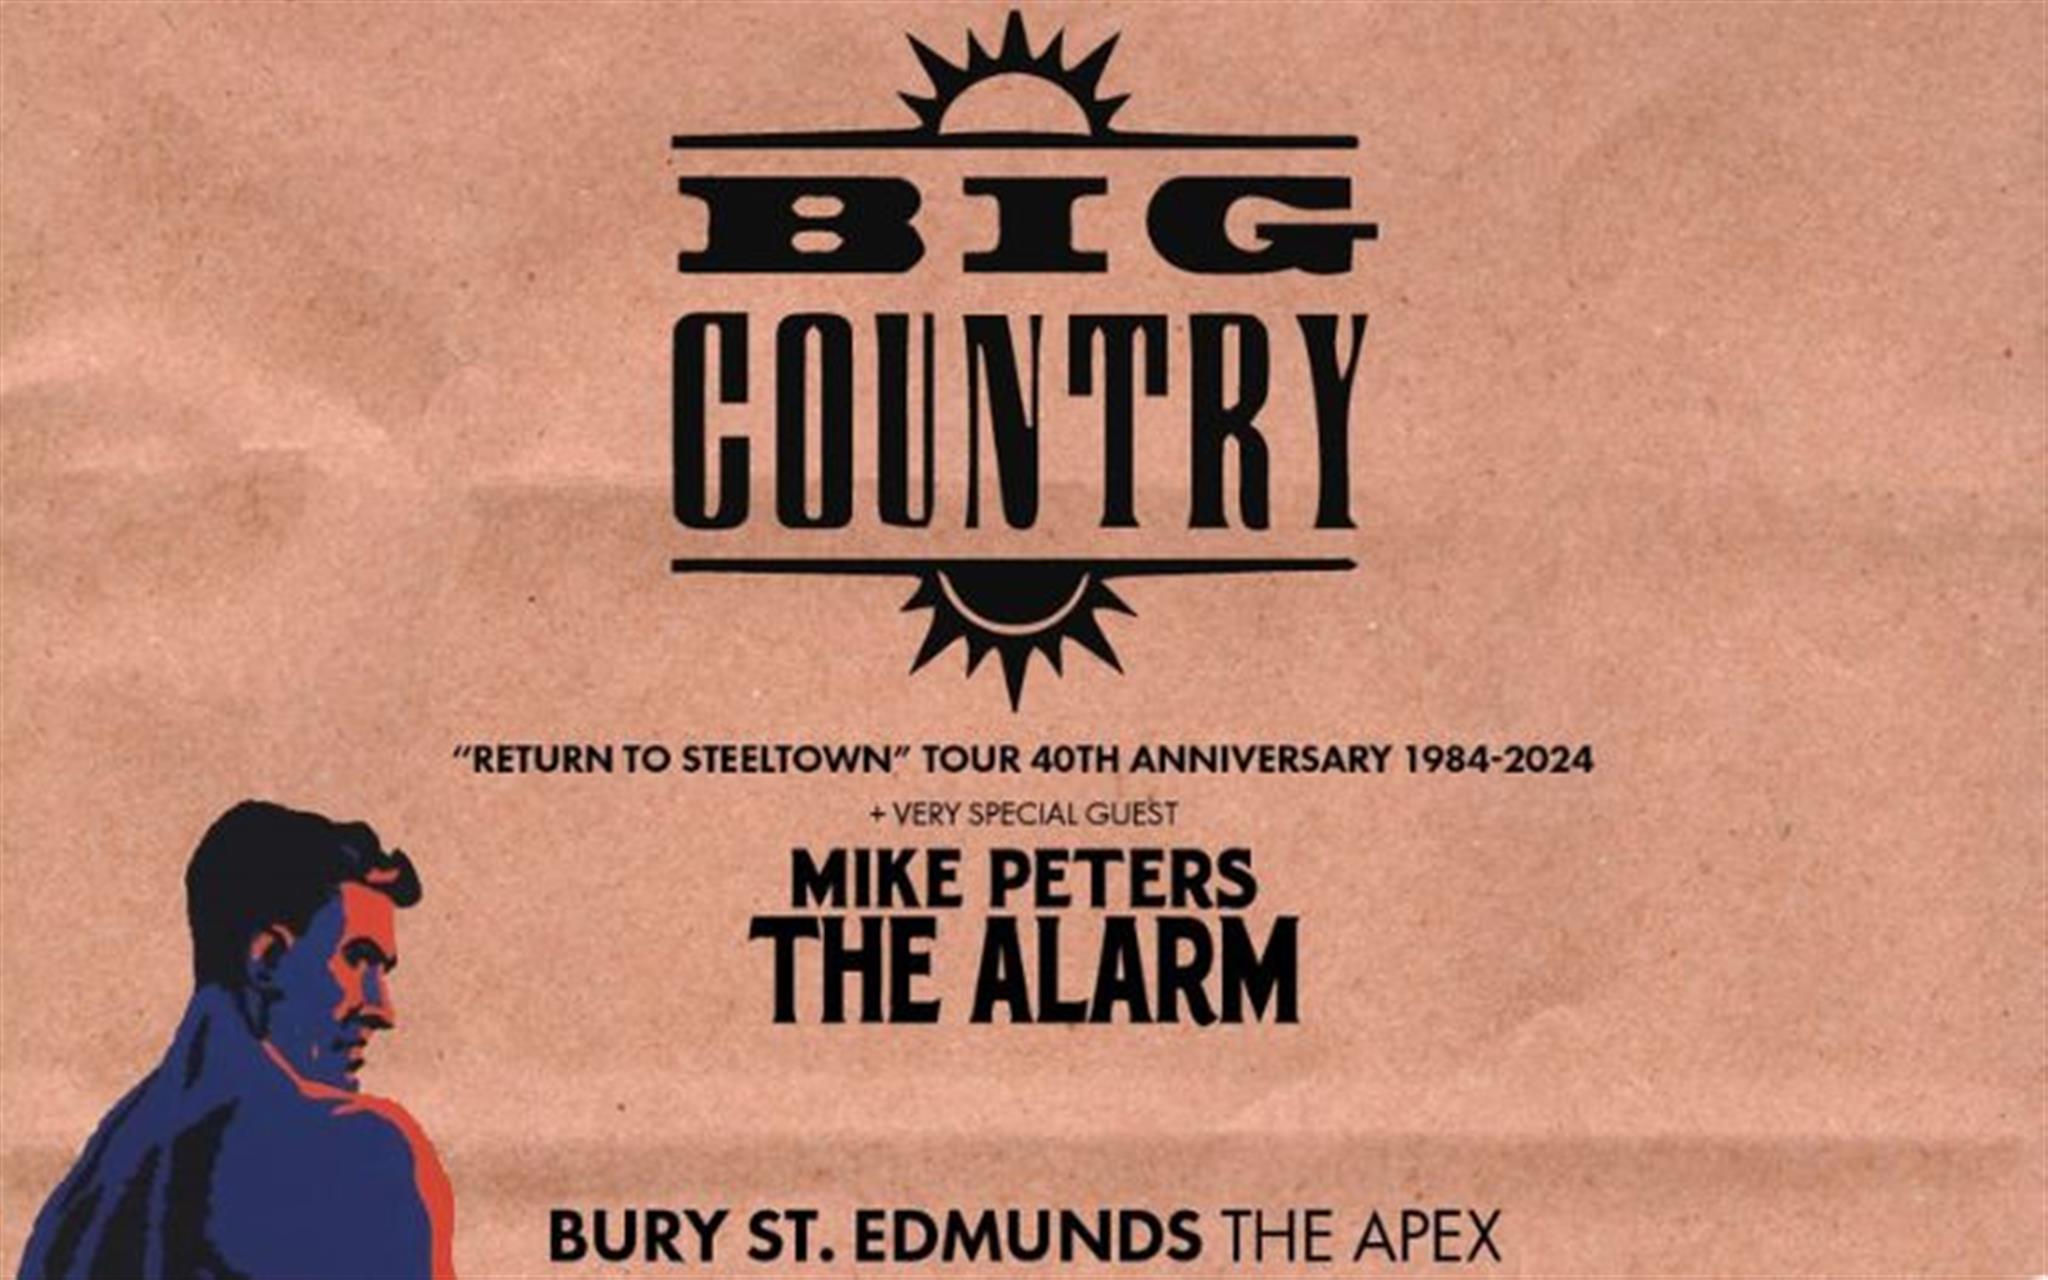 Big Country & Mike Peters of The Alarm image